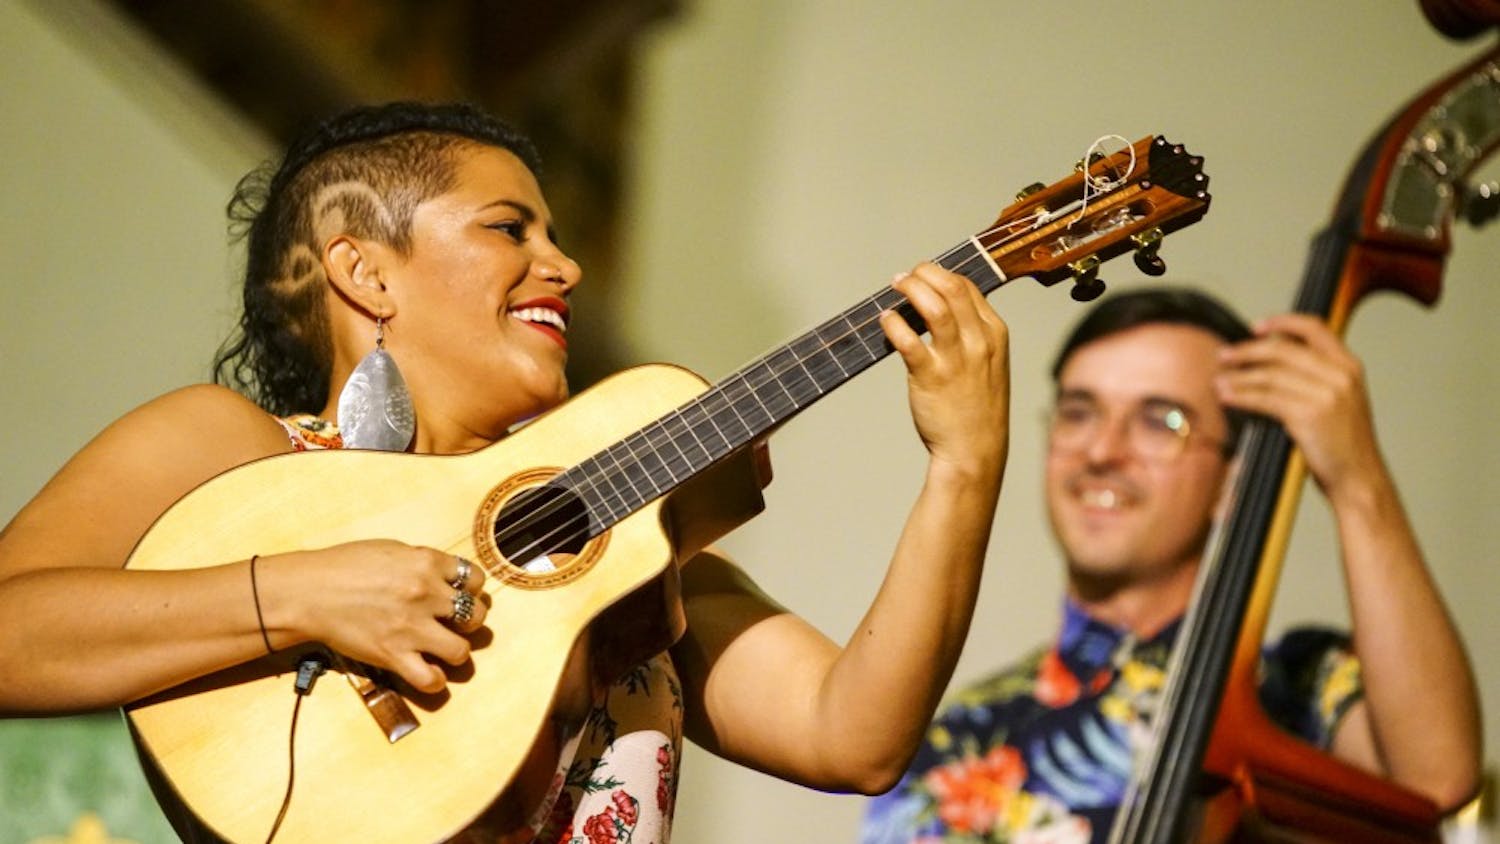 Mafer Bandola of Ladama plays a solo on the bandola llanera during the Lotus World Music and Arts Festival Saturday night in the First United Methodist Church. Ladama specializes in Pan-American music combining the styles of traditional Brazilian, Venezuelan and Colombian music with contemporary American pop and jazz.